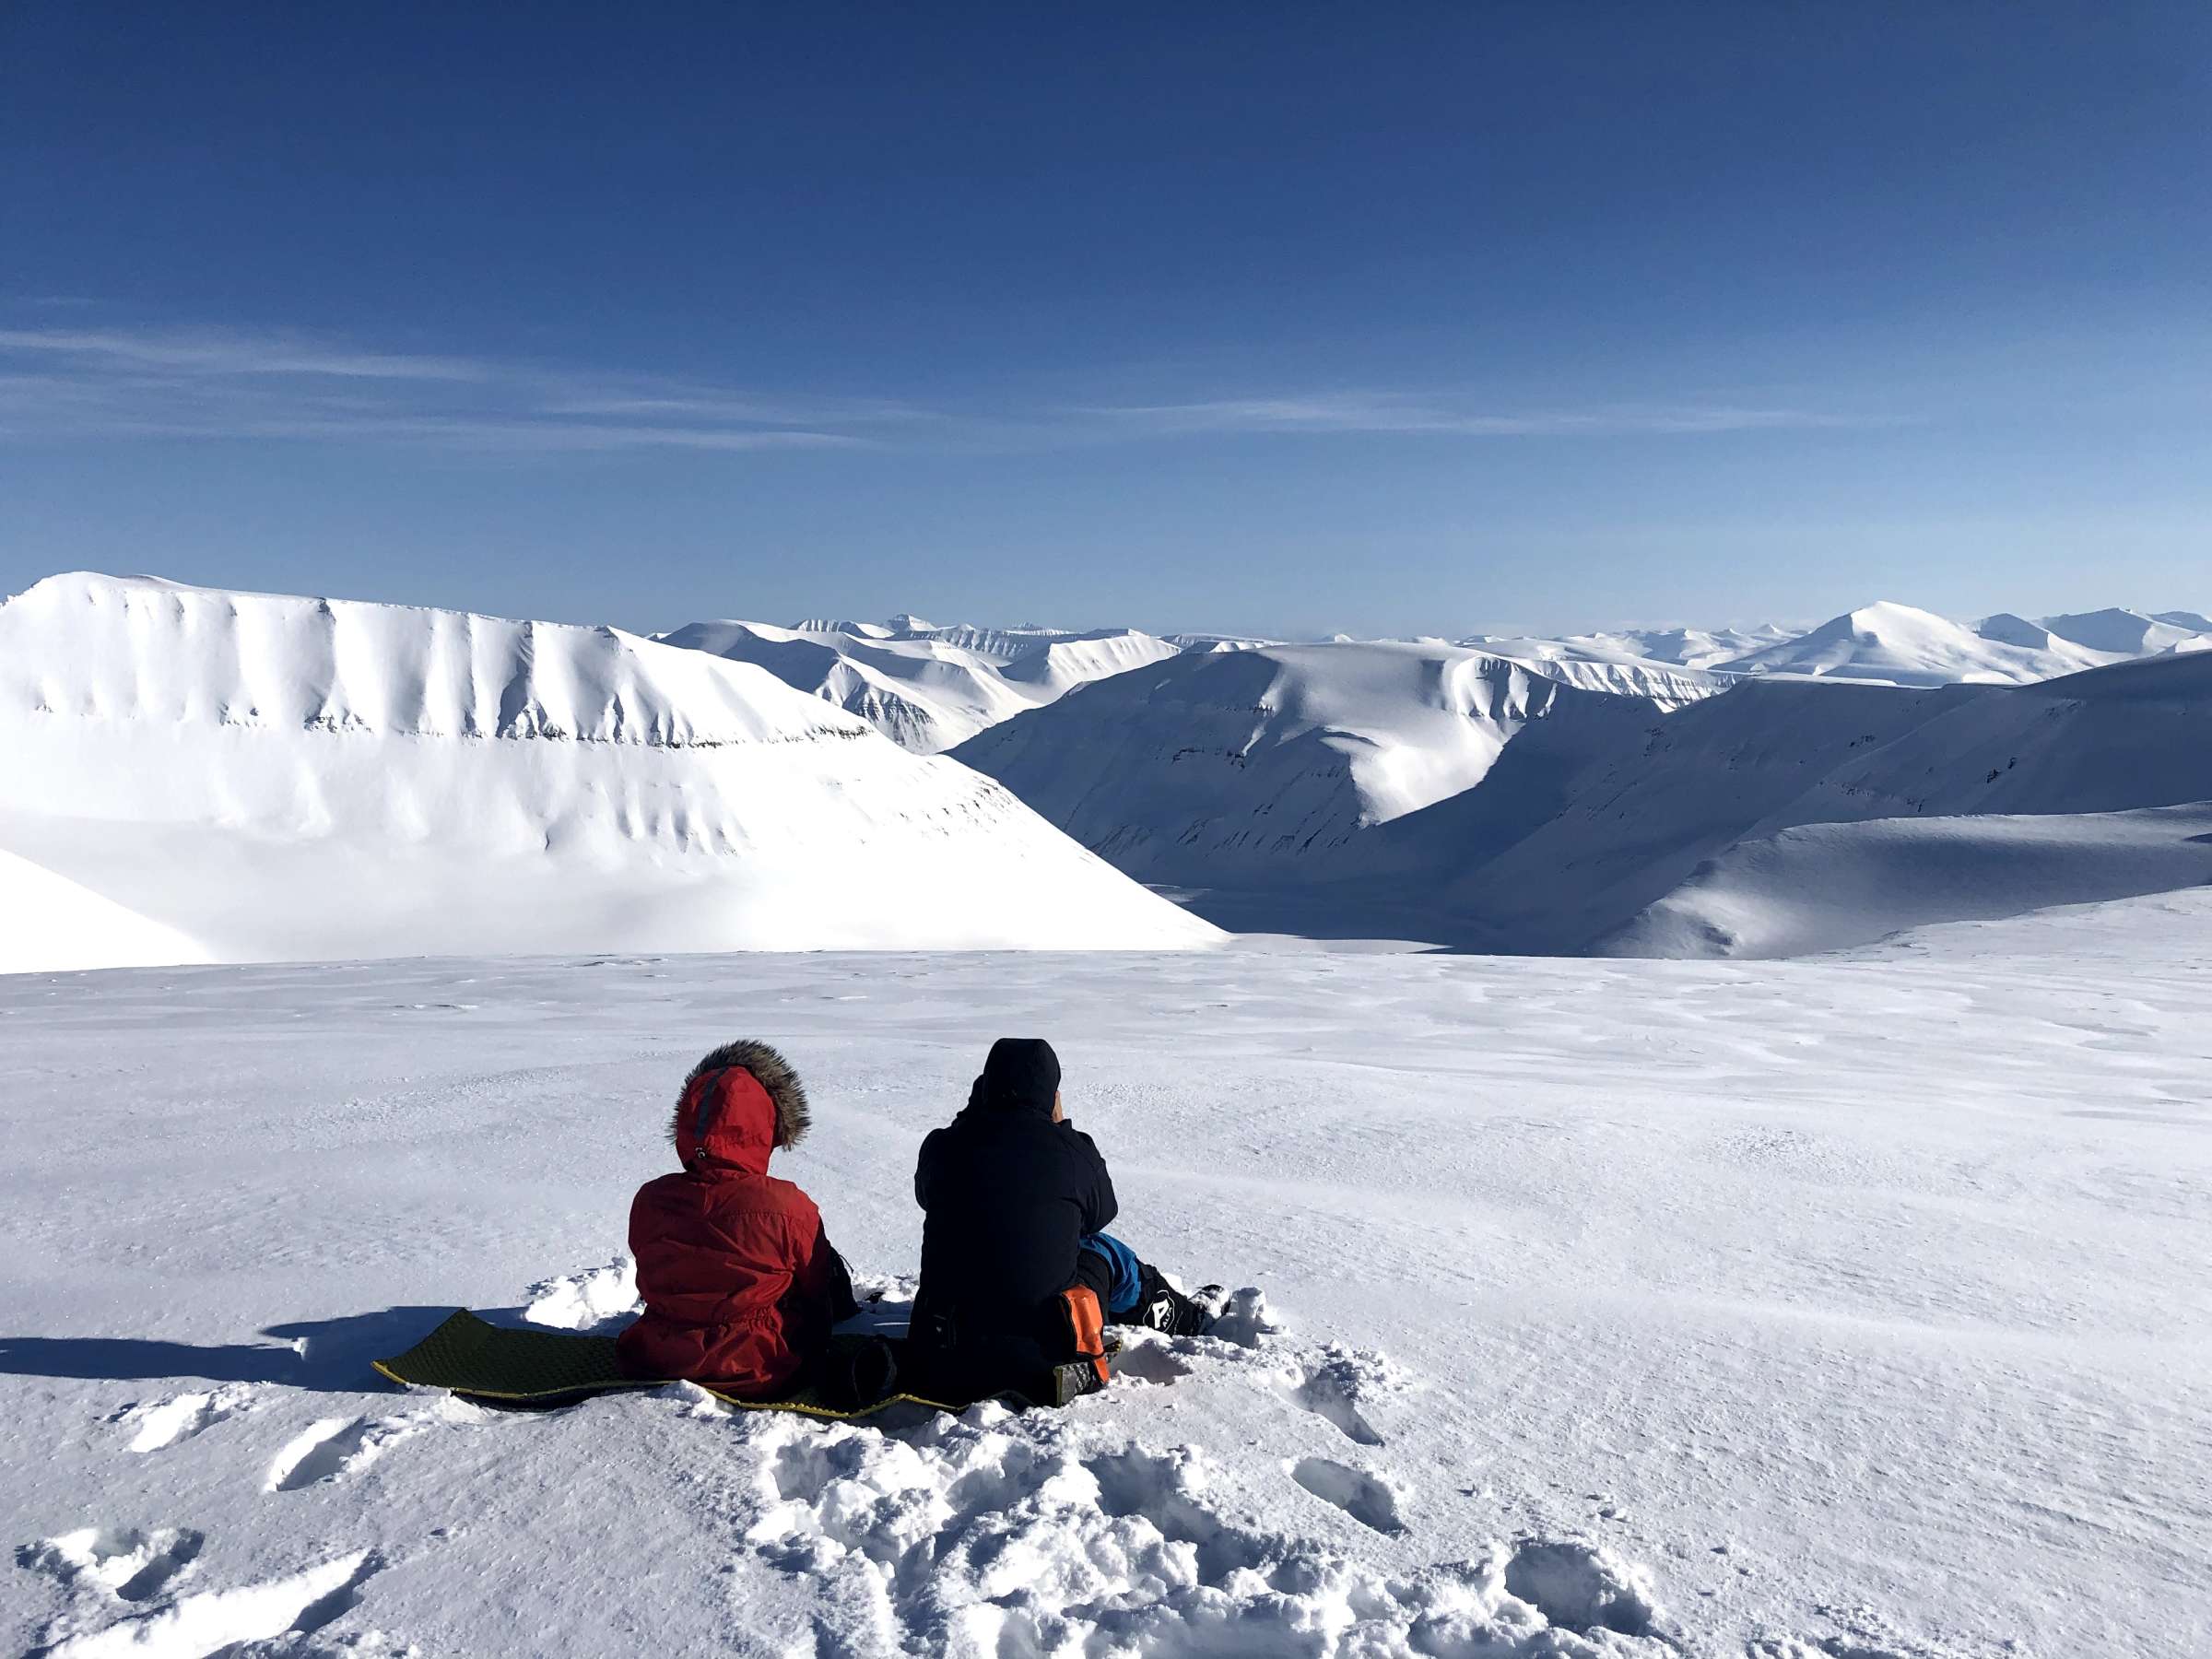 Two adventurers it on the snow of Svalbard, looking out over the environment.